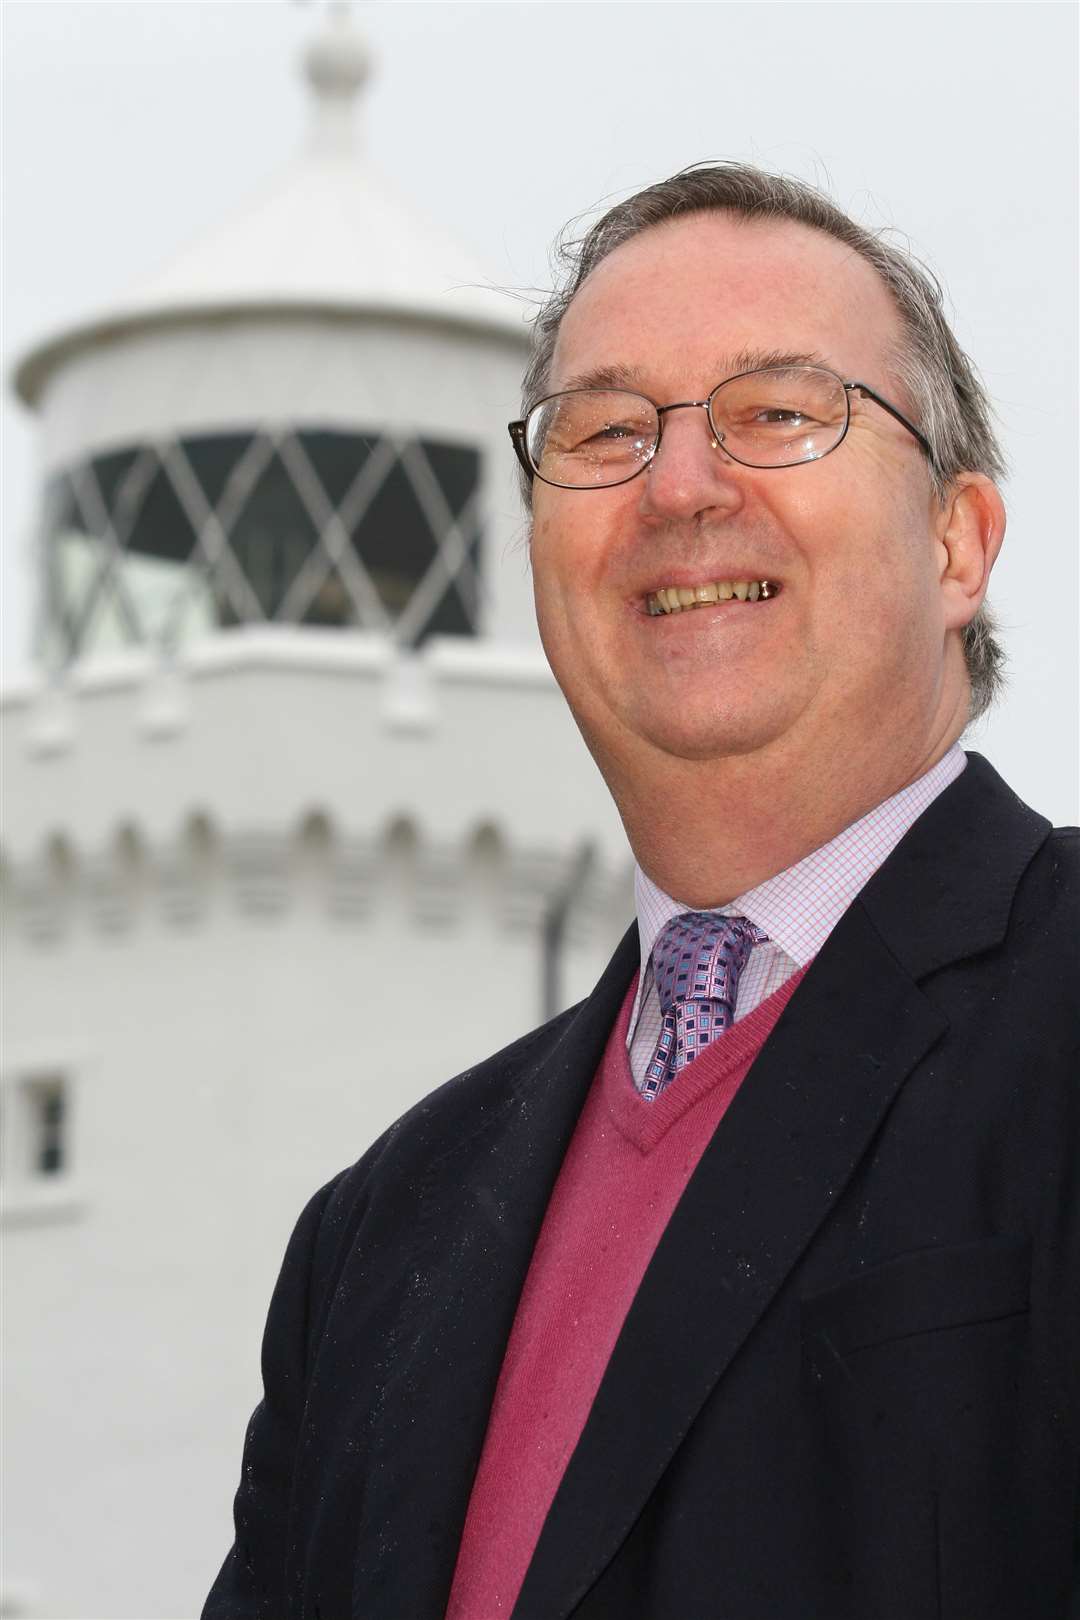 Dover council leader Paul Watkins will retire as leader and ward councilor for St Margaret's-at-Cliffe on Saturday, September 30